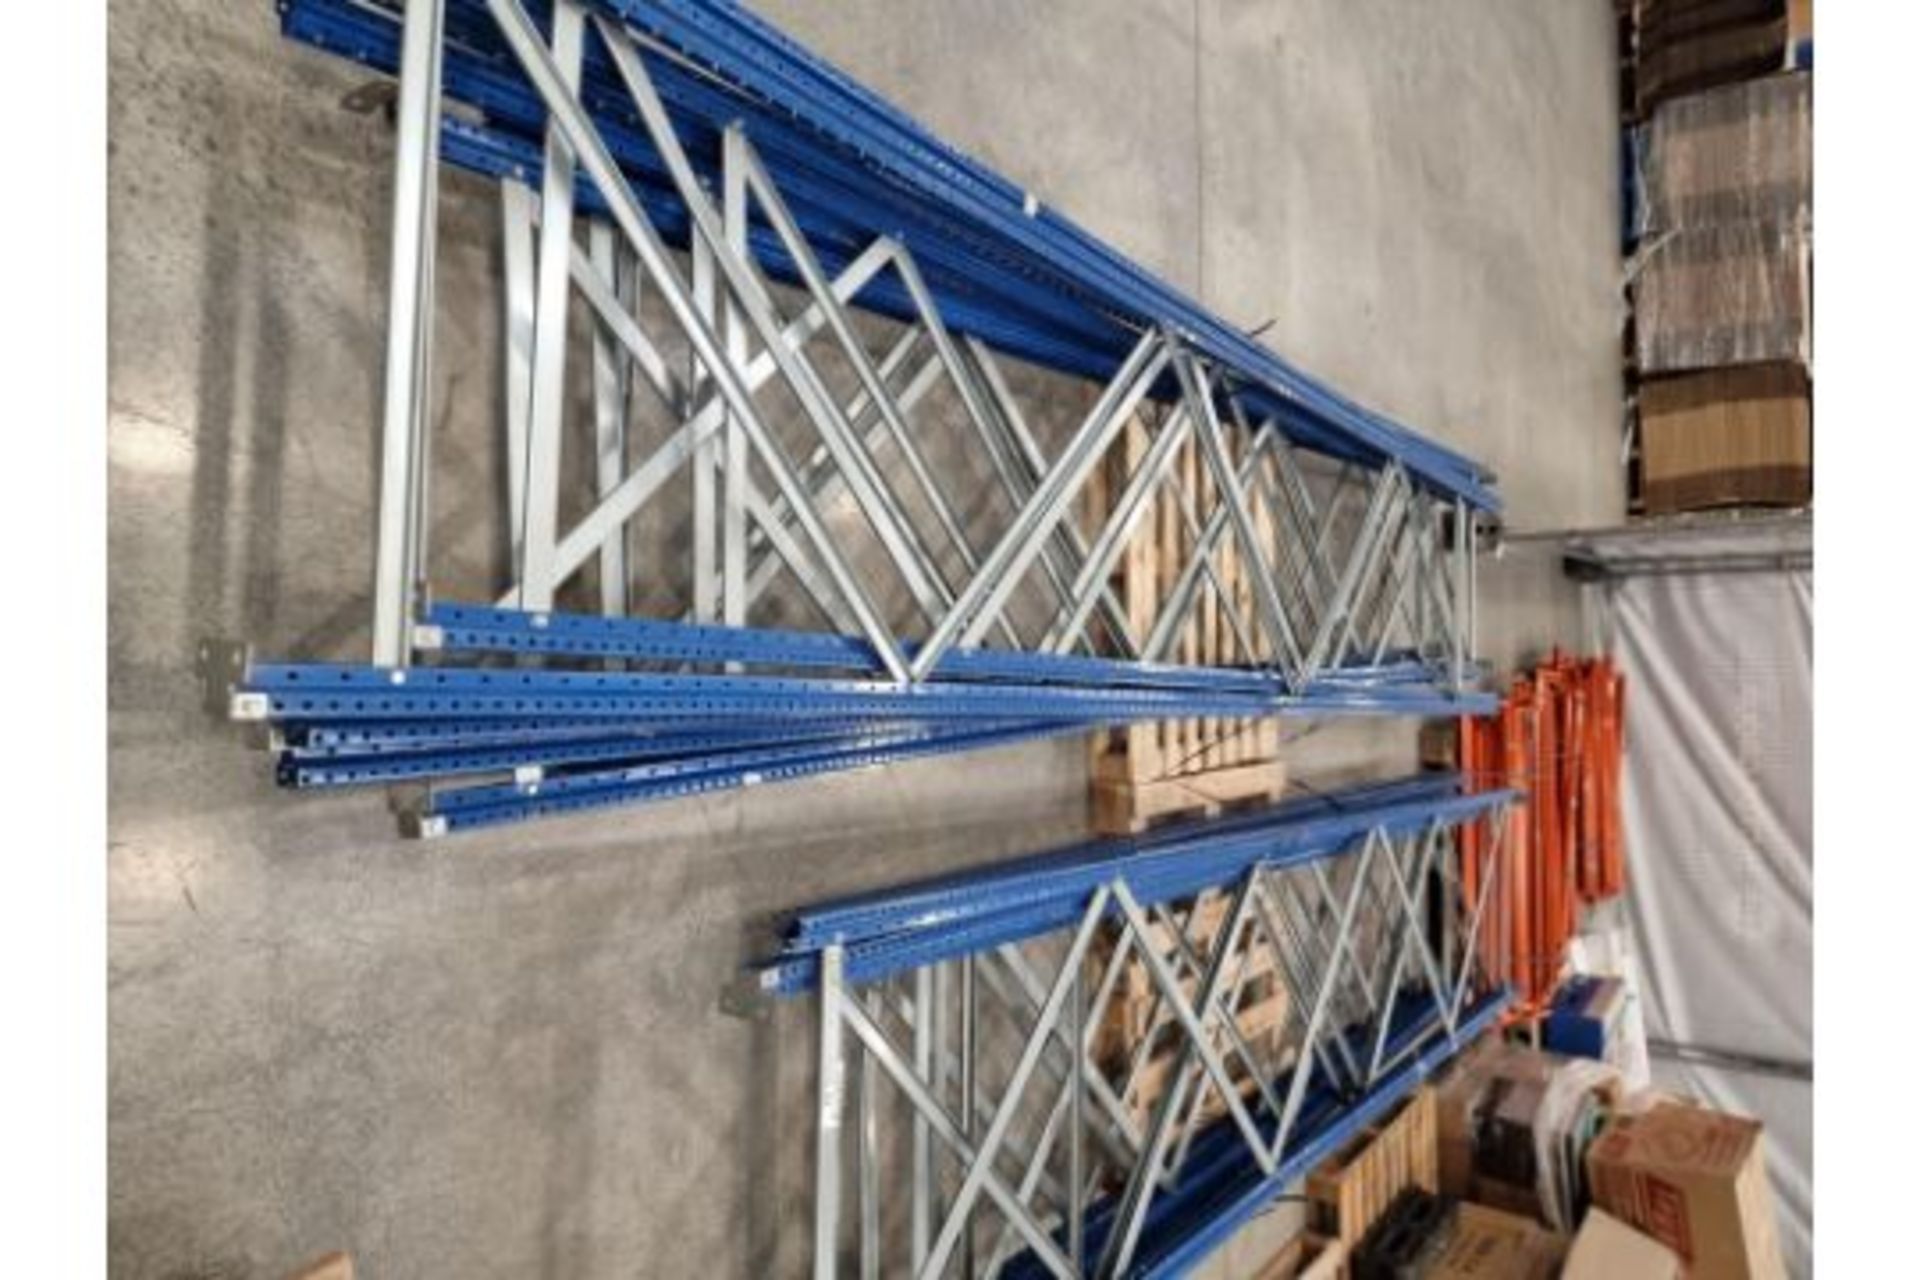 LARGE QUANTITY OF RACKING TO INCLUDE APPROX. 15 UPRIGHTS & 150 CROSS BEAMS. ON 6 PALLETS - Image 2 of 3